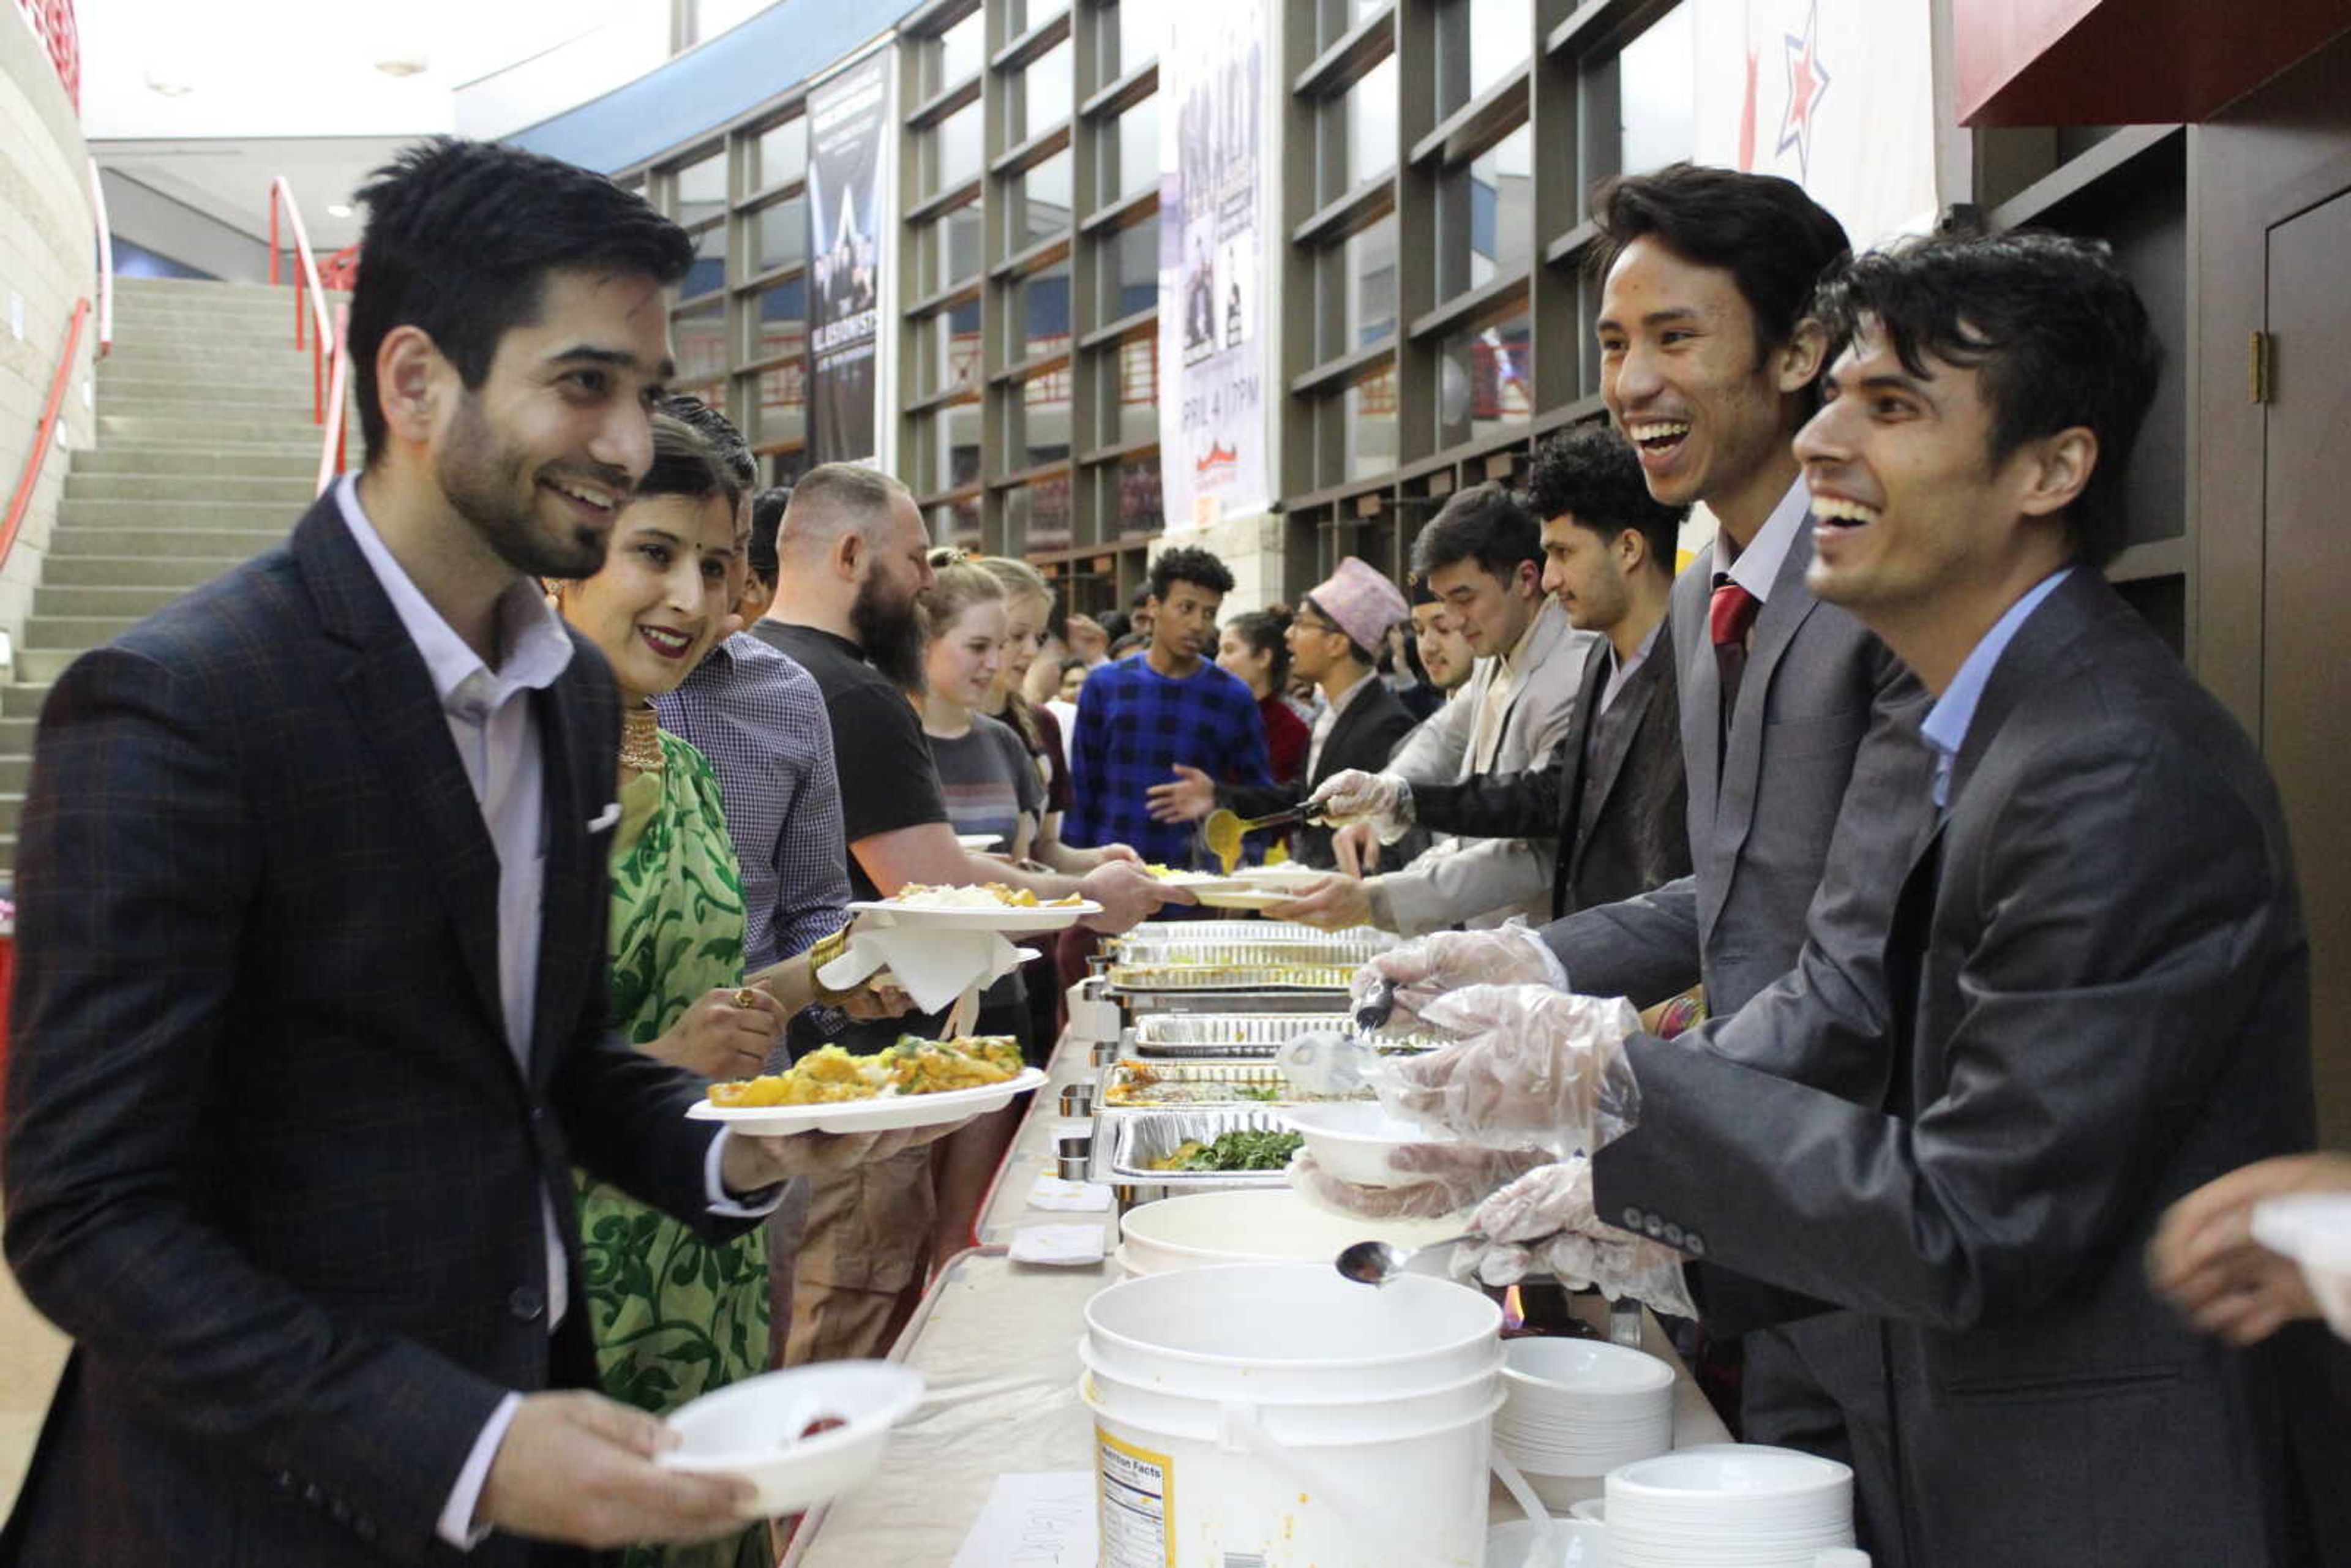 NSA members serving Nepali dishes to attendees. 